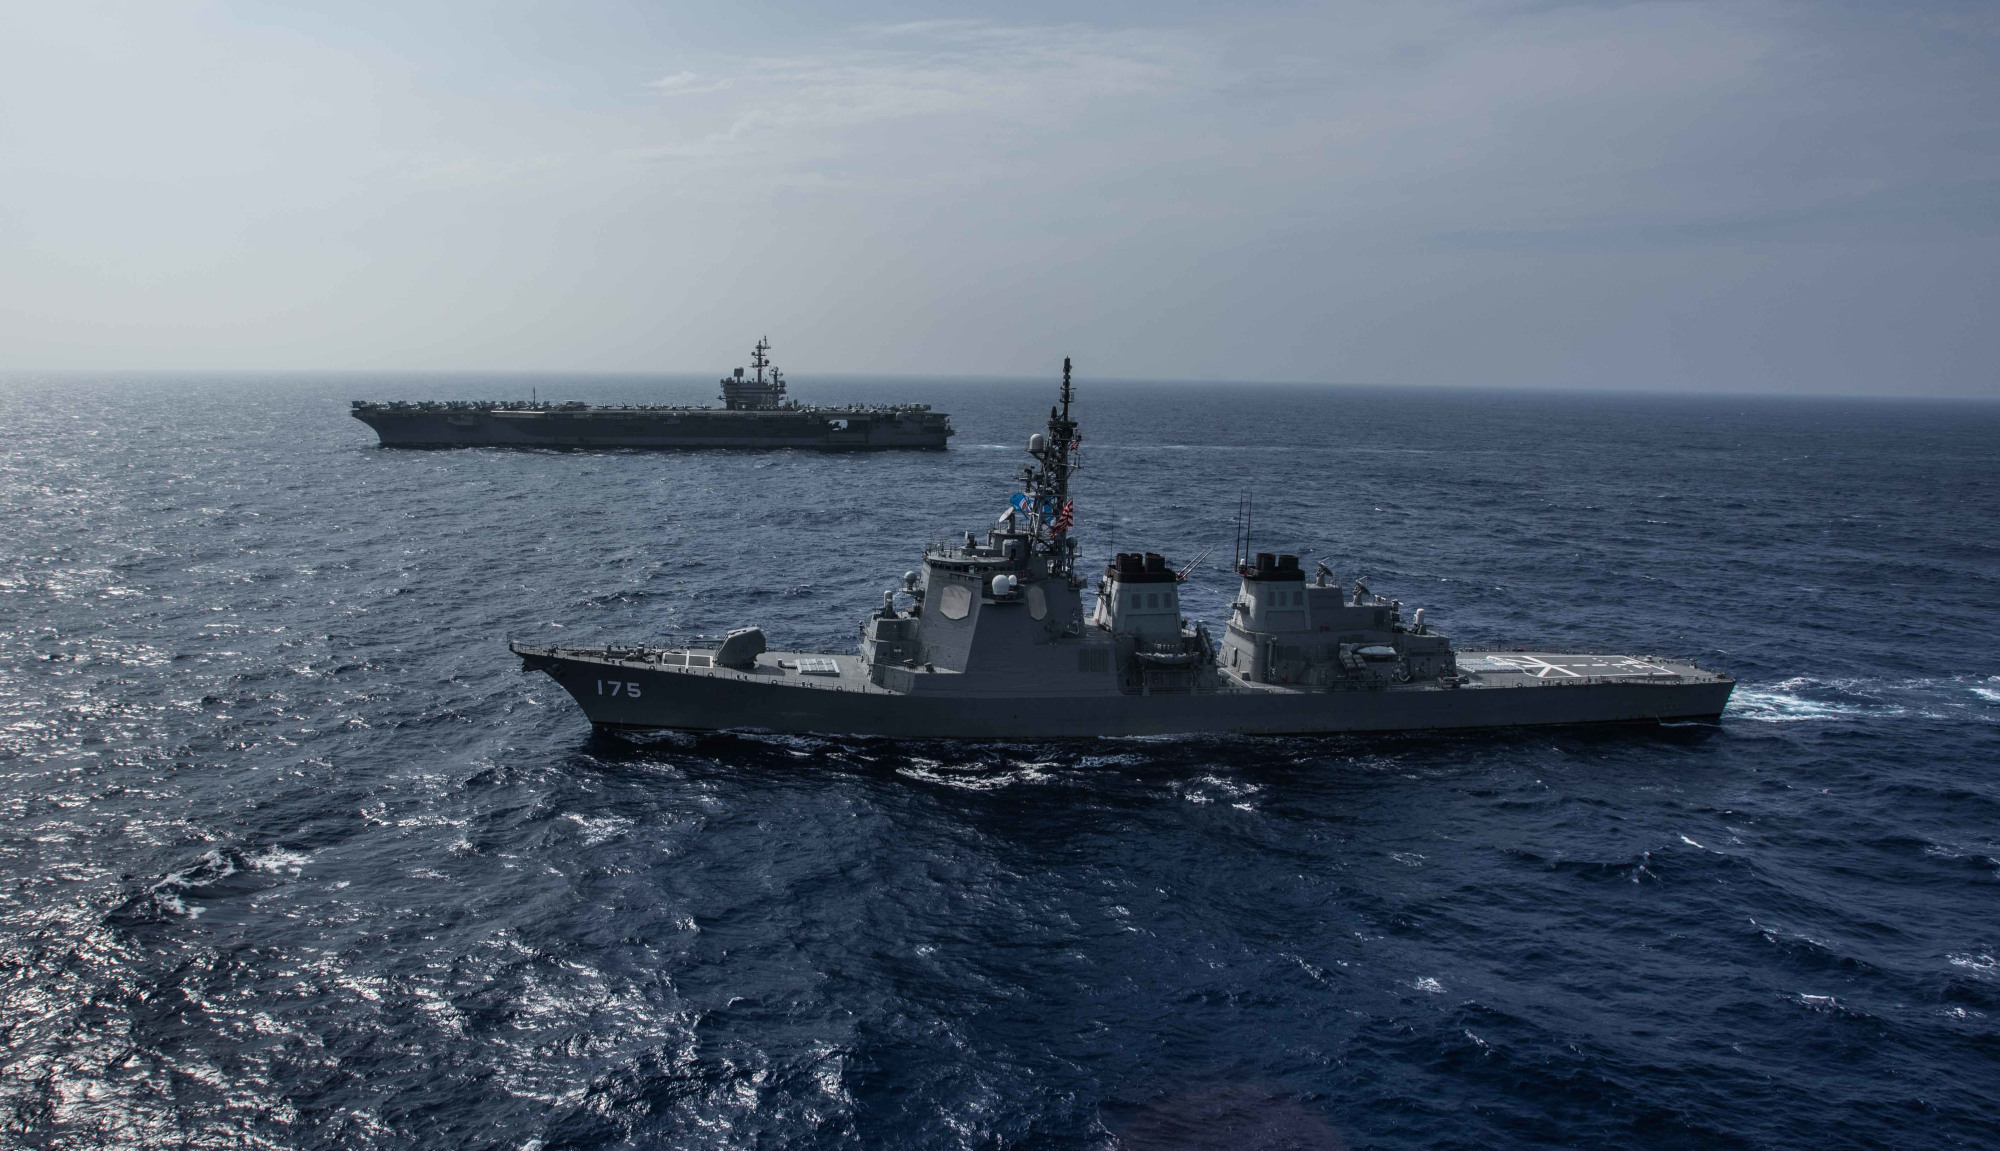 The Maritime Self-Defense Force guided-missile destroyer Myoko sails with the USS Ronald Reagan aircraft carrier in the Philippines Sea on Aug. 15. The Japan-U.S. alliance plays a key role in Japan's 'Free and Open Indo-Pacific Strategy.' | USS RONALD REAGAN (CVN 76)